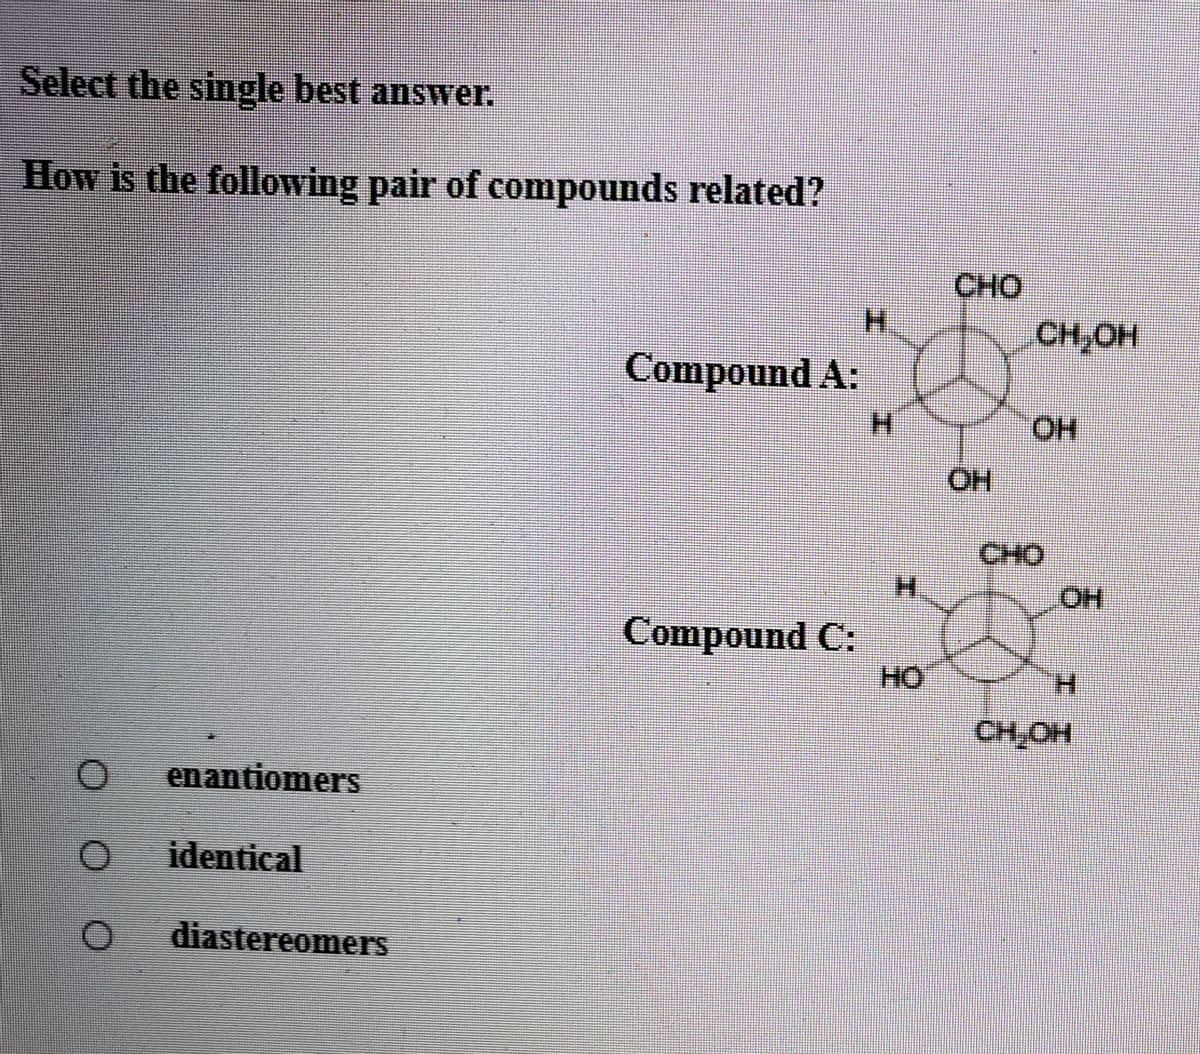 Select the single best answer.
How is the following pair of compounds related?
CHO
H.
CH;OH
Compound A:
H.
HO.
CHO
H.
HO
Compound C:
HO
H.
CH,OH
enantiomers
identical
diastereomers
エ
